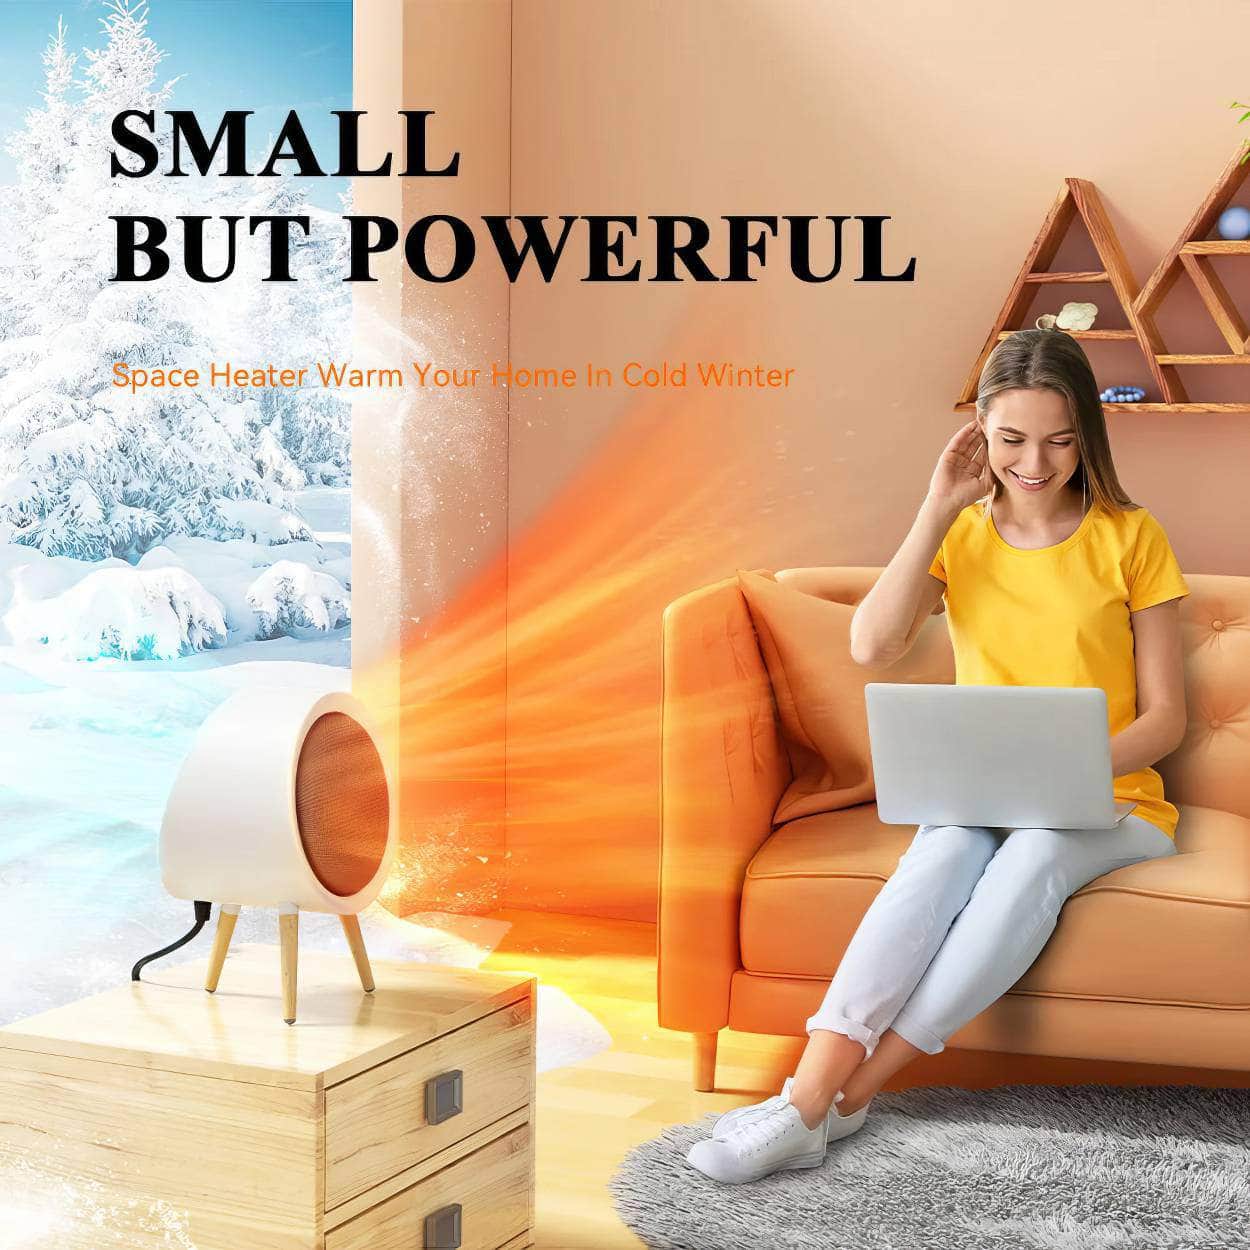 GAIATOP Home Heater - Electric Fan, Energy-Saving, Bedroom and Office Space Heating, Portable